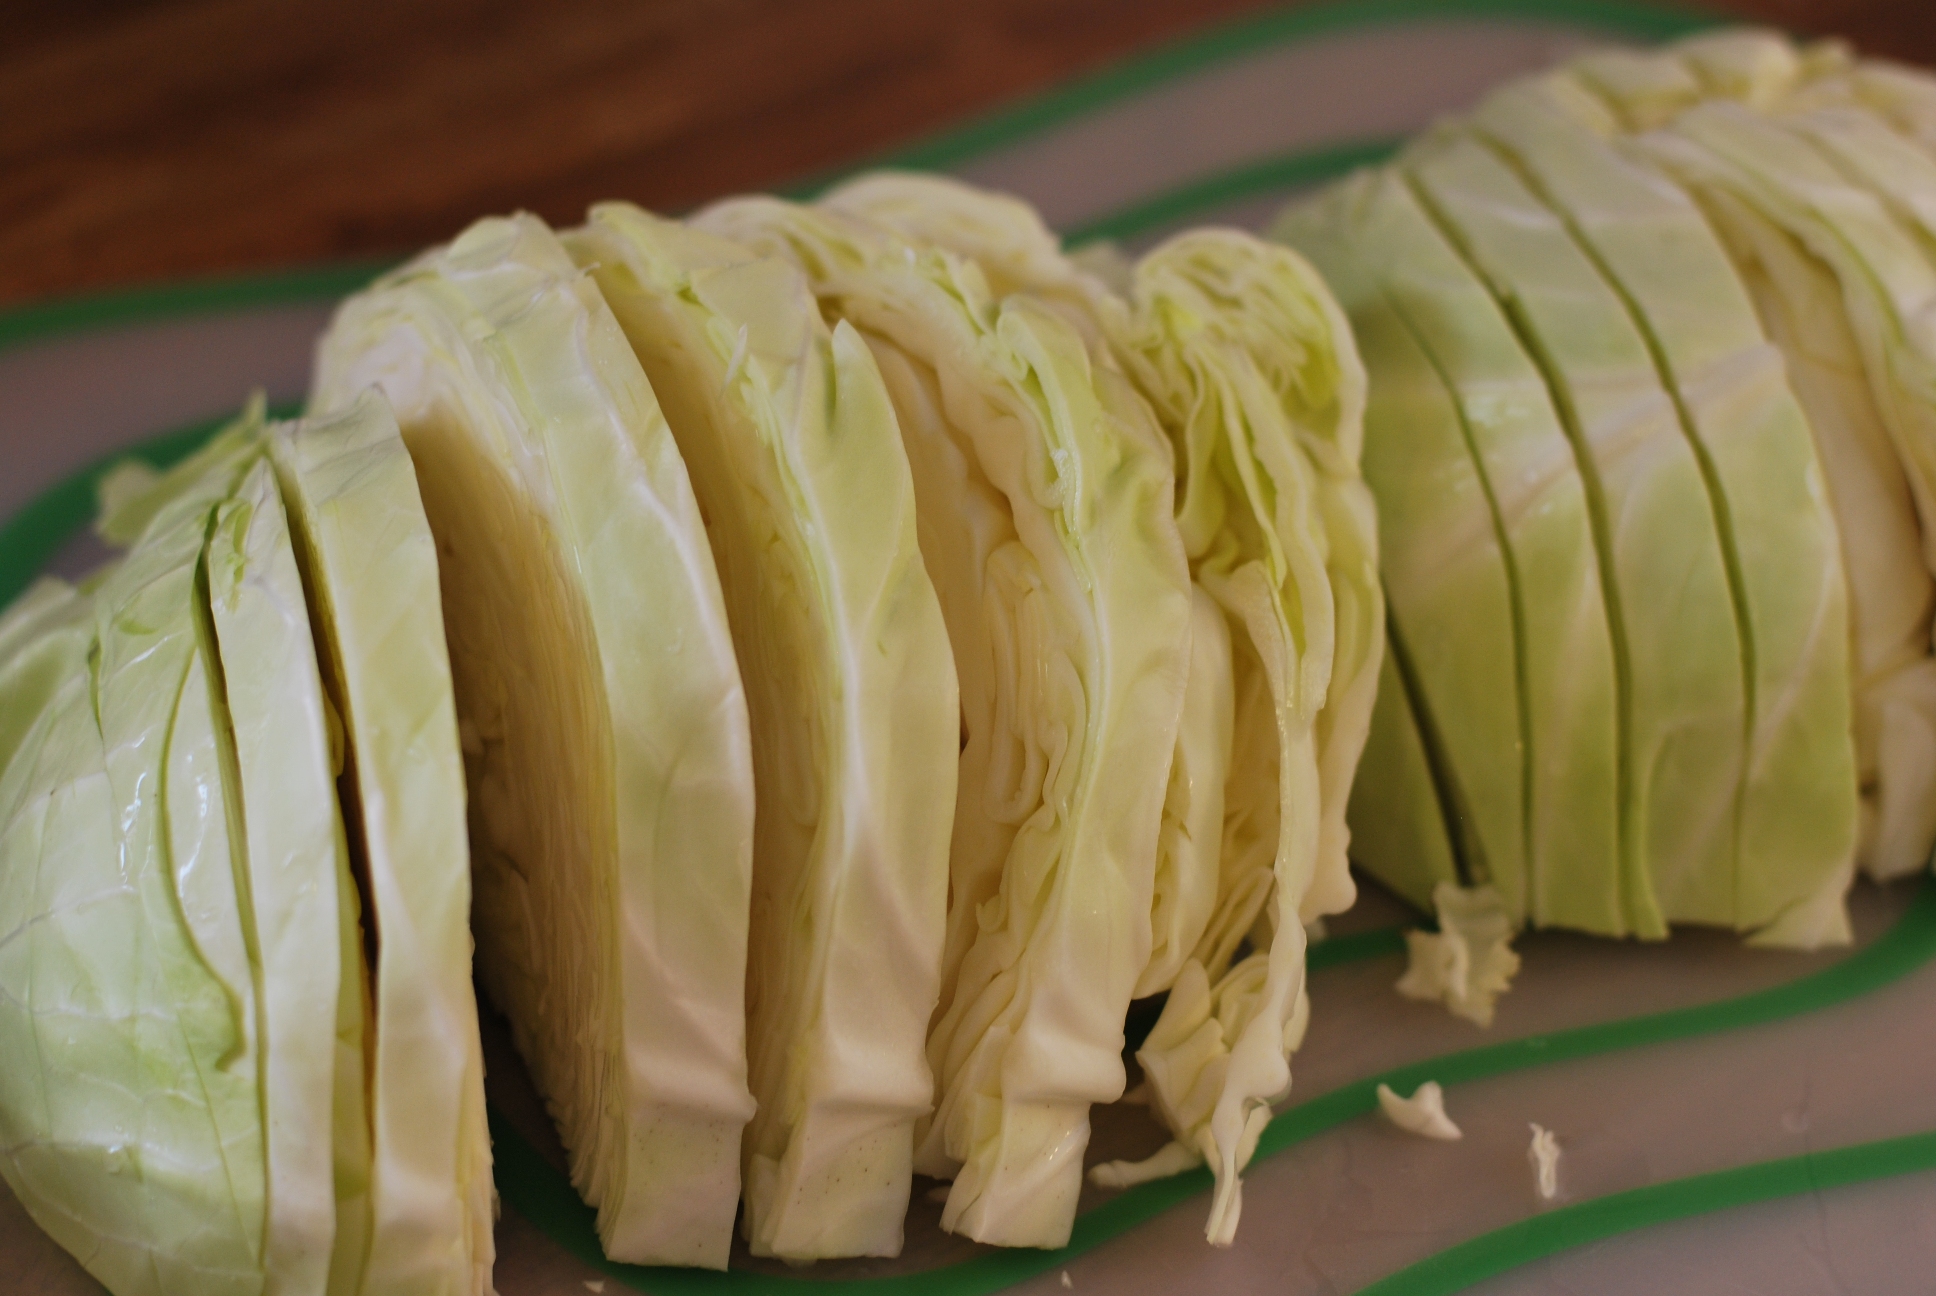 What are some crock pot cabbage recipes?